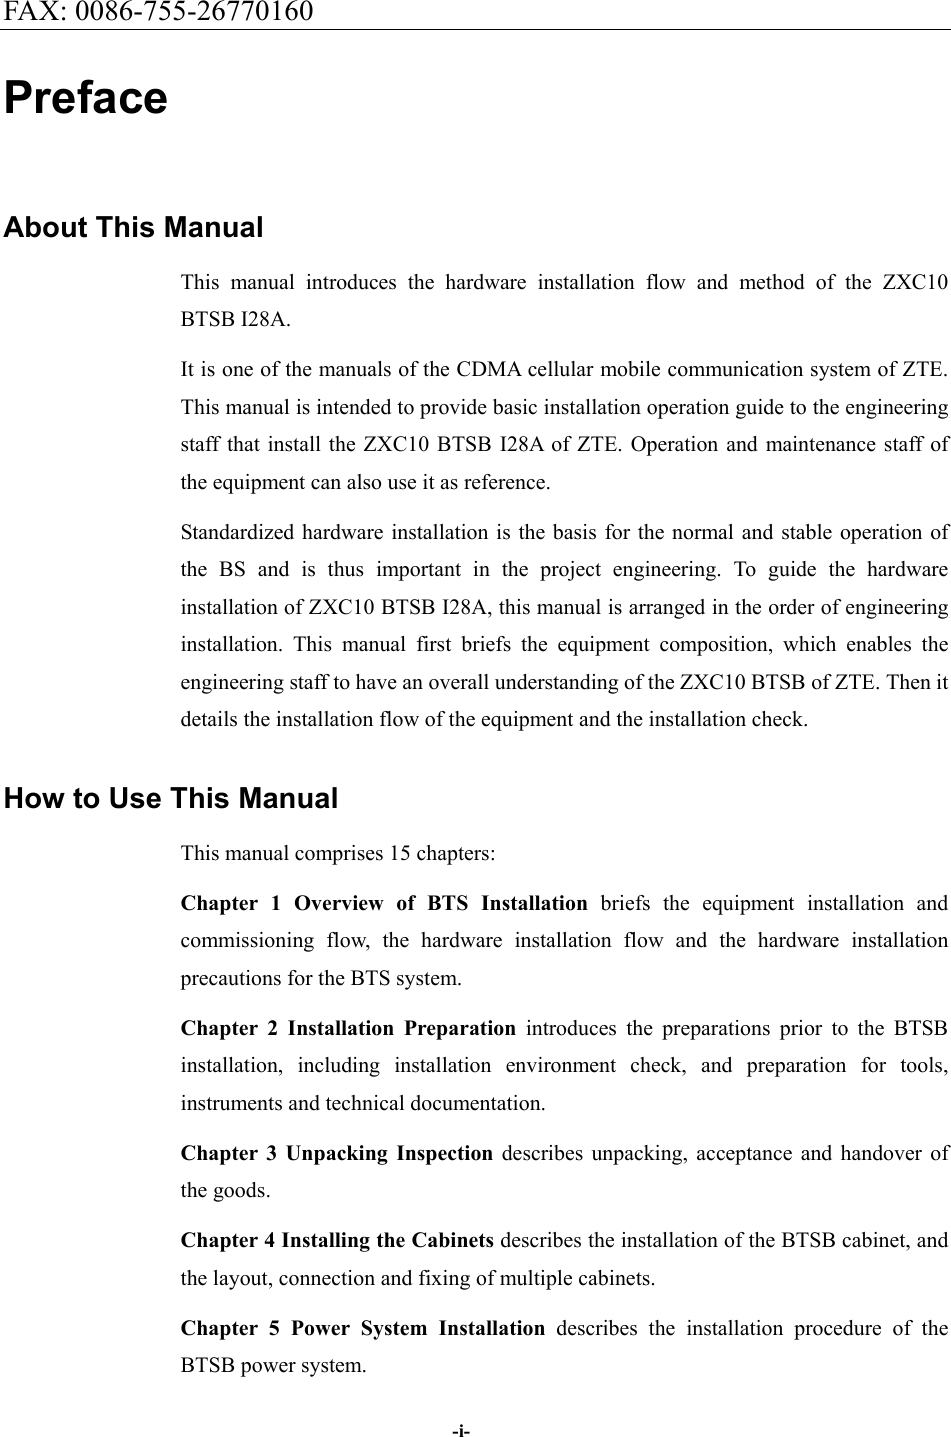 FAX: 0086-755-26770160  -i- Preface About This Manual This manual introduces the hardware installation flow and method of the ZXC10 BTSB I28A. It is one of the manuals of the CDMA cellular mobile communication system of ZTE. This manual is intended to provide basic installation operation guide to the engineering staff that install the ZXC10 BTSB I28A of ZTE. Operation and maintenance staff of the equipment can also use it as reference. Standardized hardware installation is the basis for the normal and stable operation of the BS and is thus important in the project engineering. To guide the hardware installation of ZXC10 BTSB I28A, this manual is arranged in the order of engineering installation. This manual first briefs the equipment composition, which enables the engineering staff to have an overall understanding of the ZXC10 BTSB of ZTE. Then it details the installation flow of the equipment and the installation check. How to Use This Manual This manual comprises 15 chapters: Chapter 1 Overview of BTS Installation briefs the equipment installation and commissioning flow, the hardware installation flow and the hardware installation precautions for the BTS system. Chapter 2 Installation Preparation introduces the preparations prior to the BTSB installation, including installation environment check, and preparation for tools, instruments and technical documentation.   Chapter 3 Unpacking Inspection describes unpacking, acceptance and handover of the goods. Chapter 4 Installing the Cabinets describes the installation of the BTSB cabinet, and the layout, connection and fixing of multiple cabinets. Chapter 5 Power System Installation describes the installation procedure of the BTSB power system. 